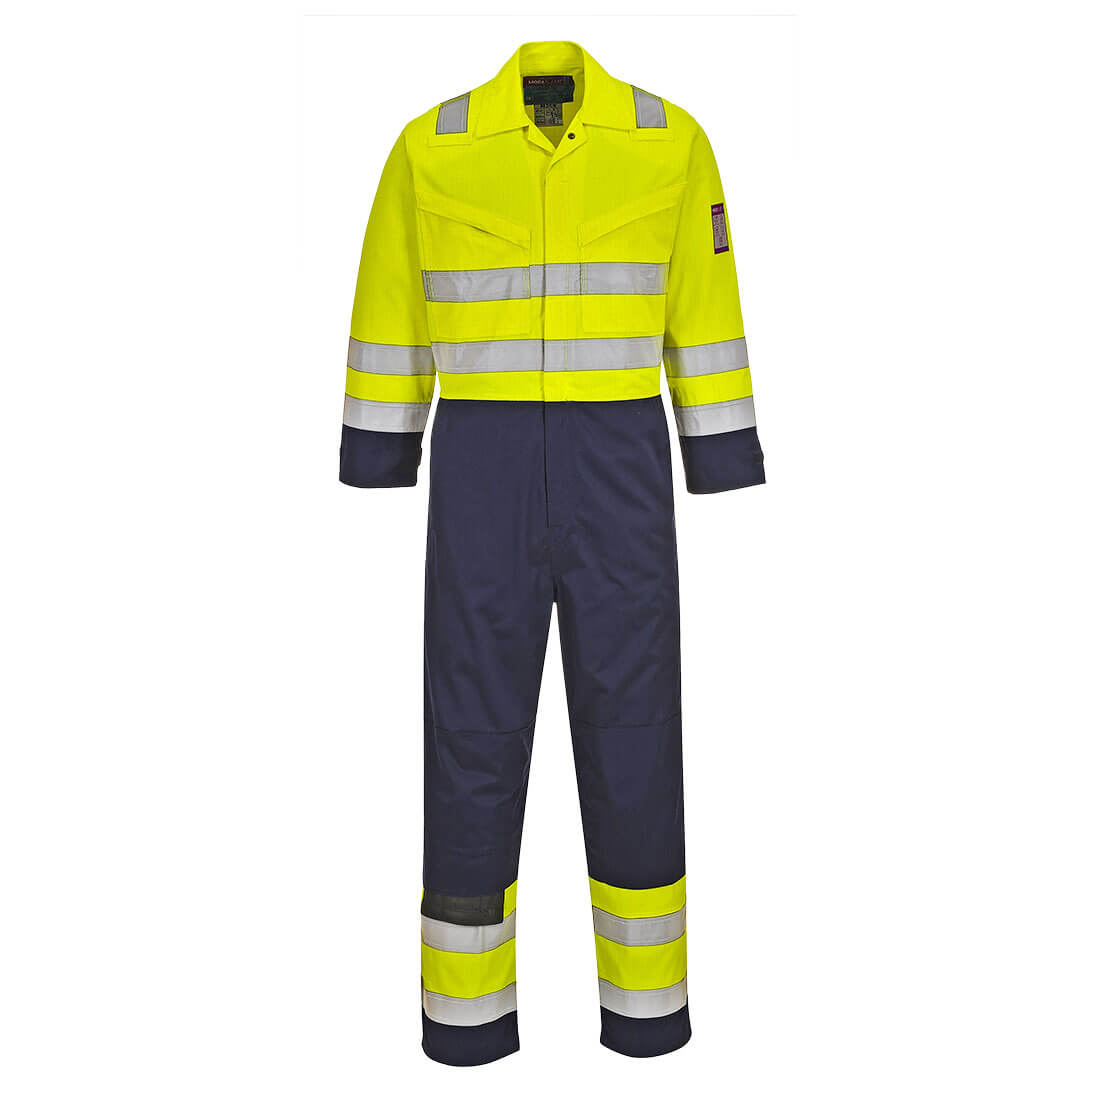 Image of Modaflame Flame Resistant Hi Vis Overall Yellow / Navy Extra Large 34"